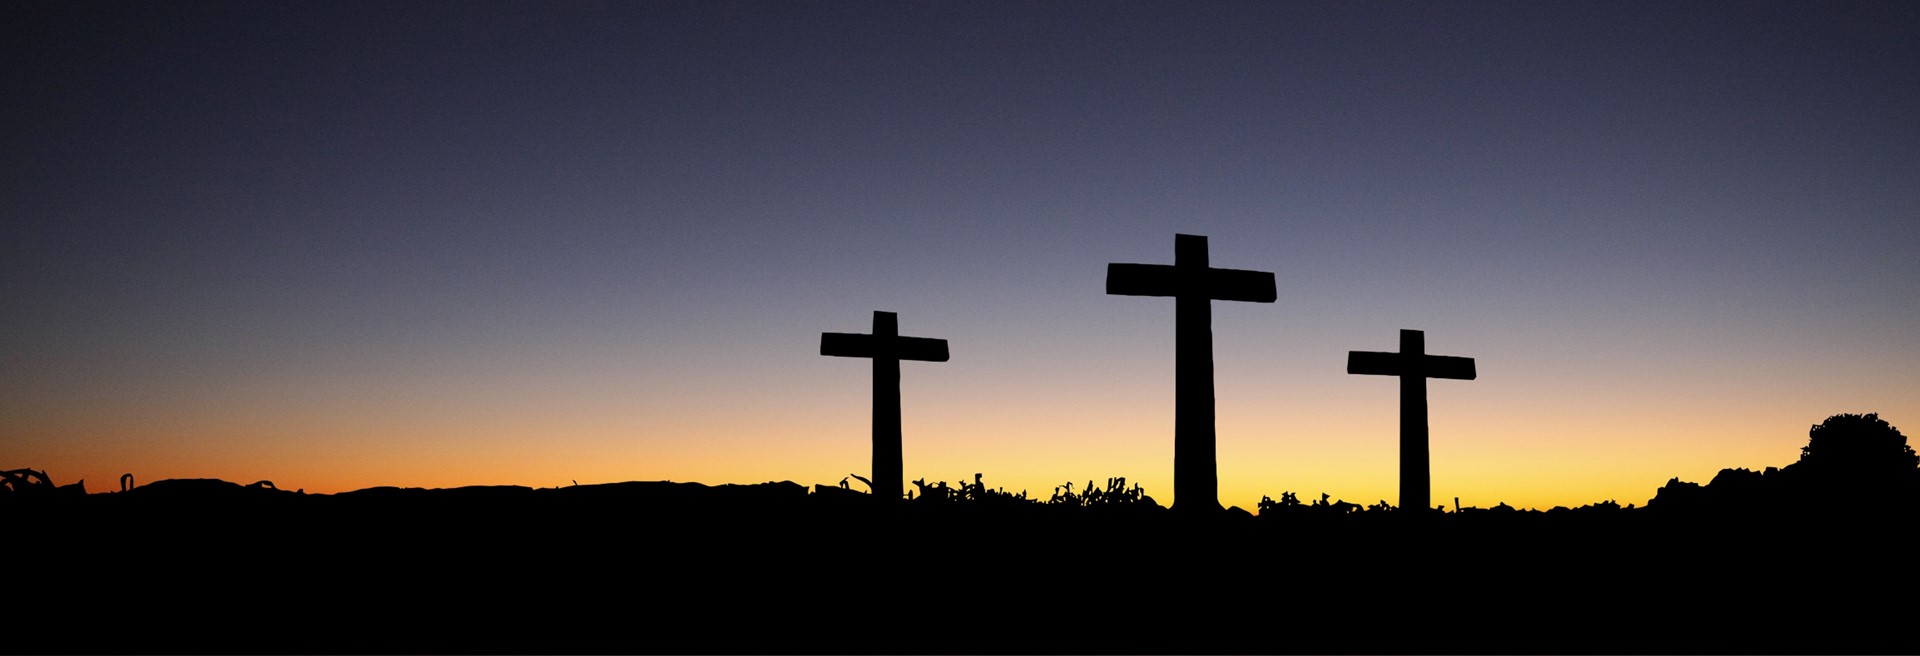 Landscape View Of 3 Cross Standing During Sunset 161188